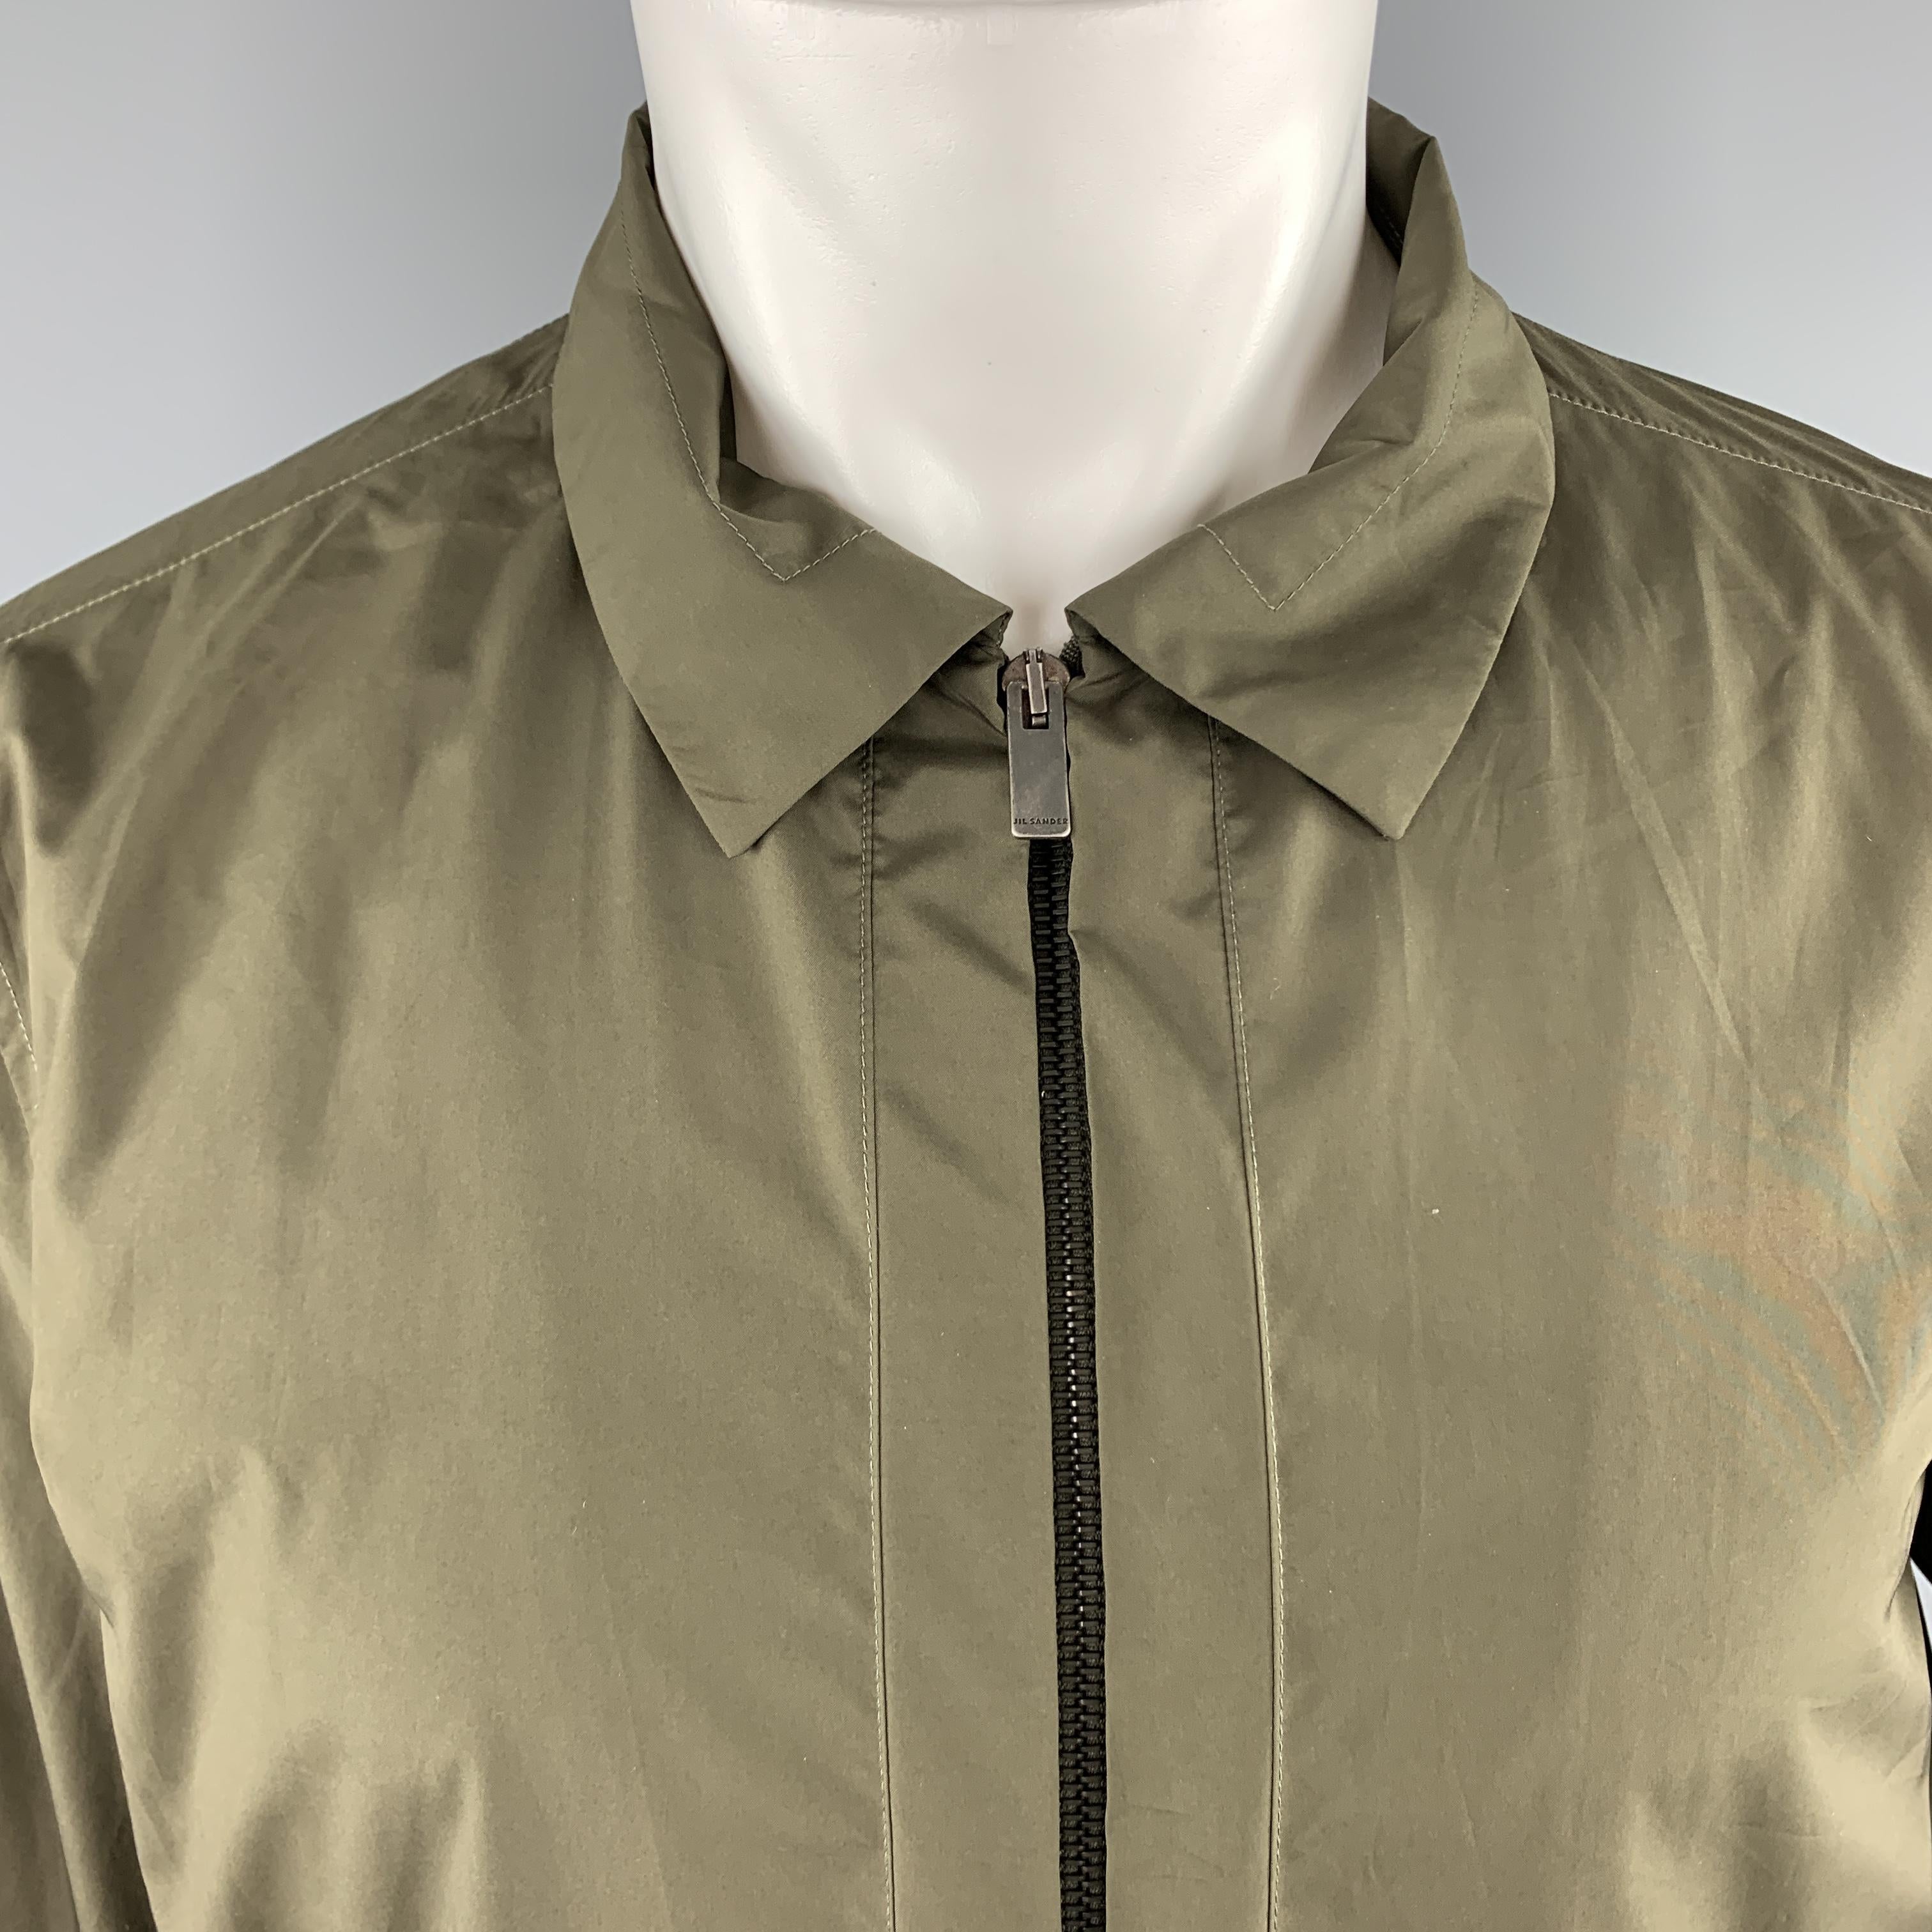 JIL SANDER blouson style jacket comes in olive green windbreaker material with a pointed collar, zip front with open placket, slit pockets, and side tabs. Made in Italy.

Excellent Pre-Owned Condition.
Marked: IT 50

Measurements:

Shoulder: 17